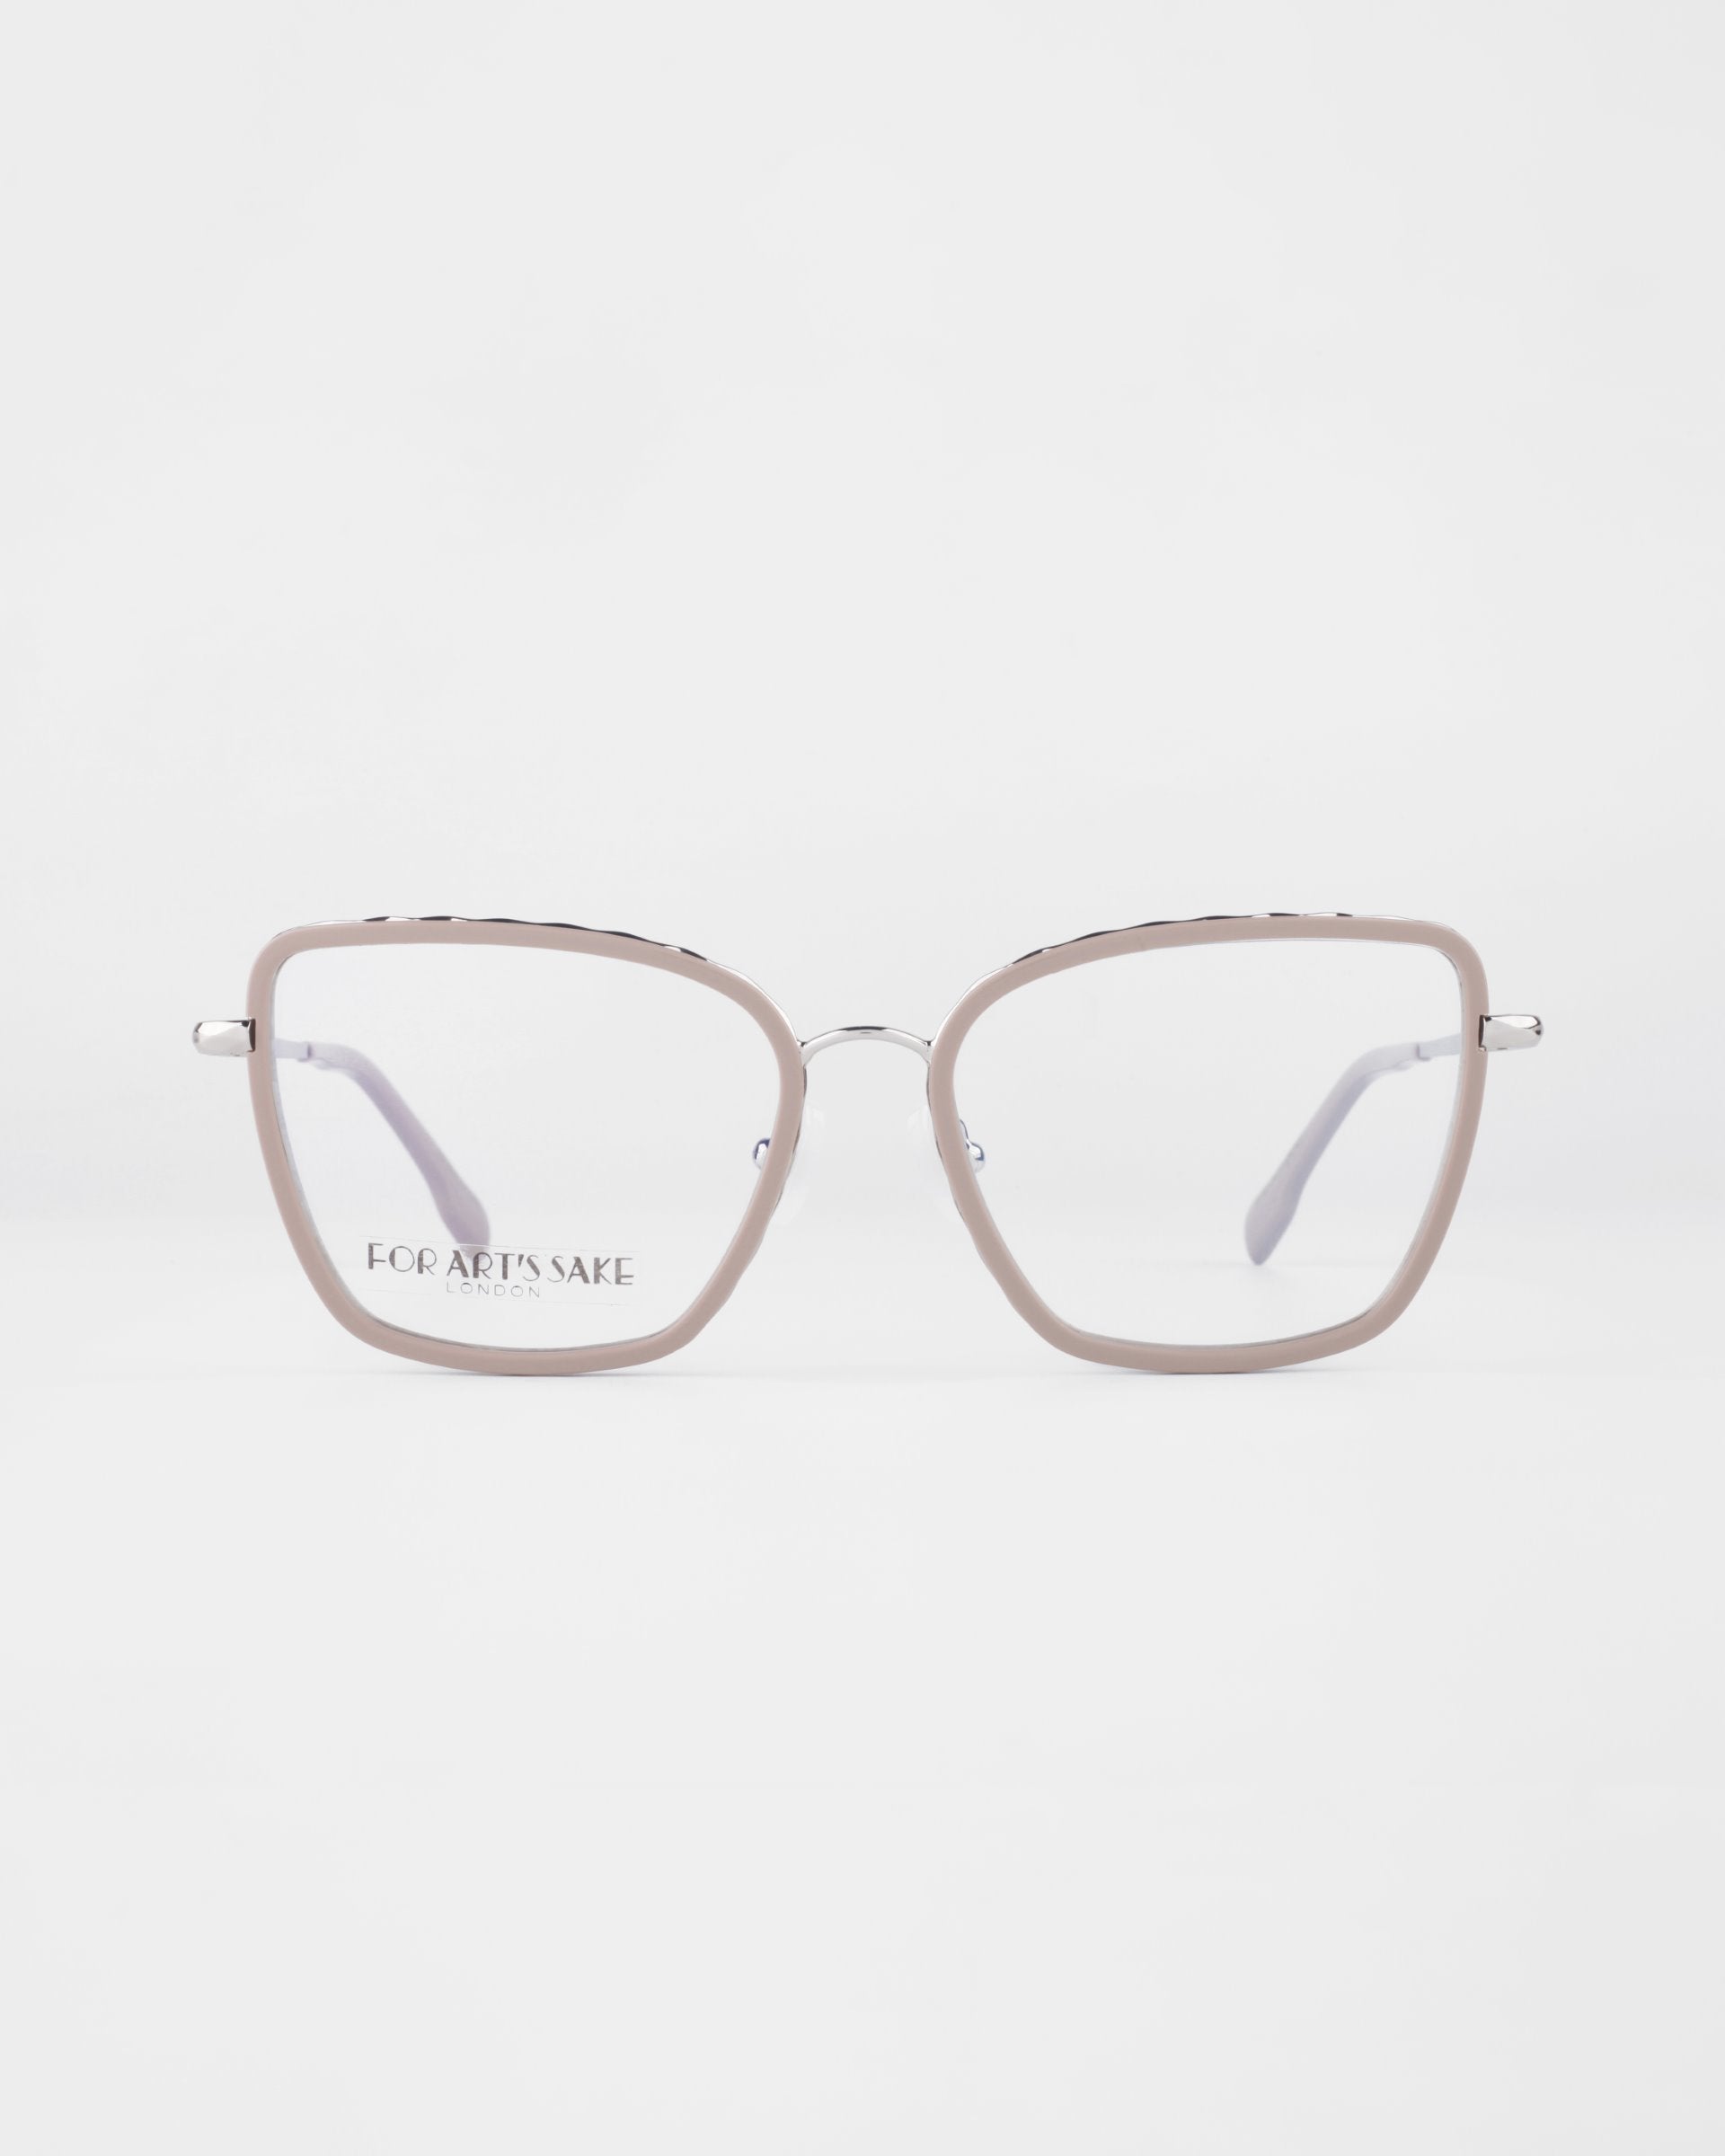 A pair of square-framed eyeglasses with thin, light pink rims and clear prescription lenses. The temple arms are silver with white end tips. The words "For Art's Sake®" are faintly visible on one of the lenses. The background is plain white. The product name is Lace from For Art's Sake®.